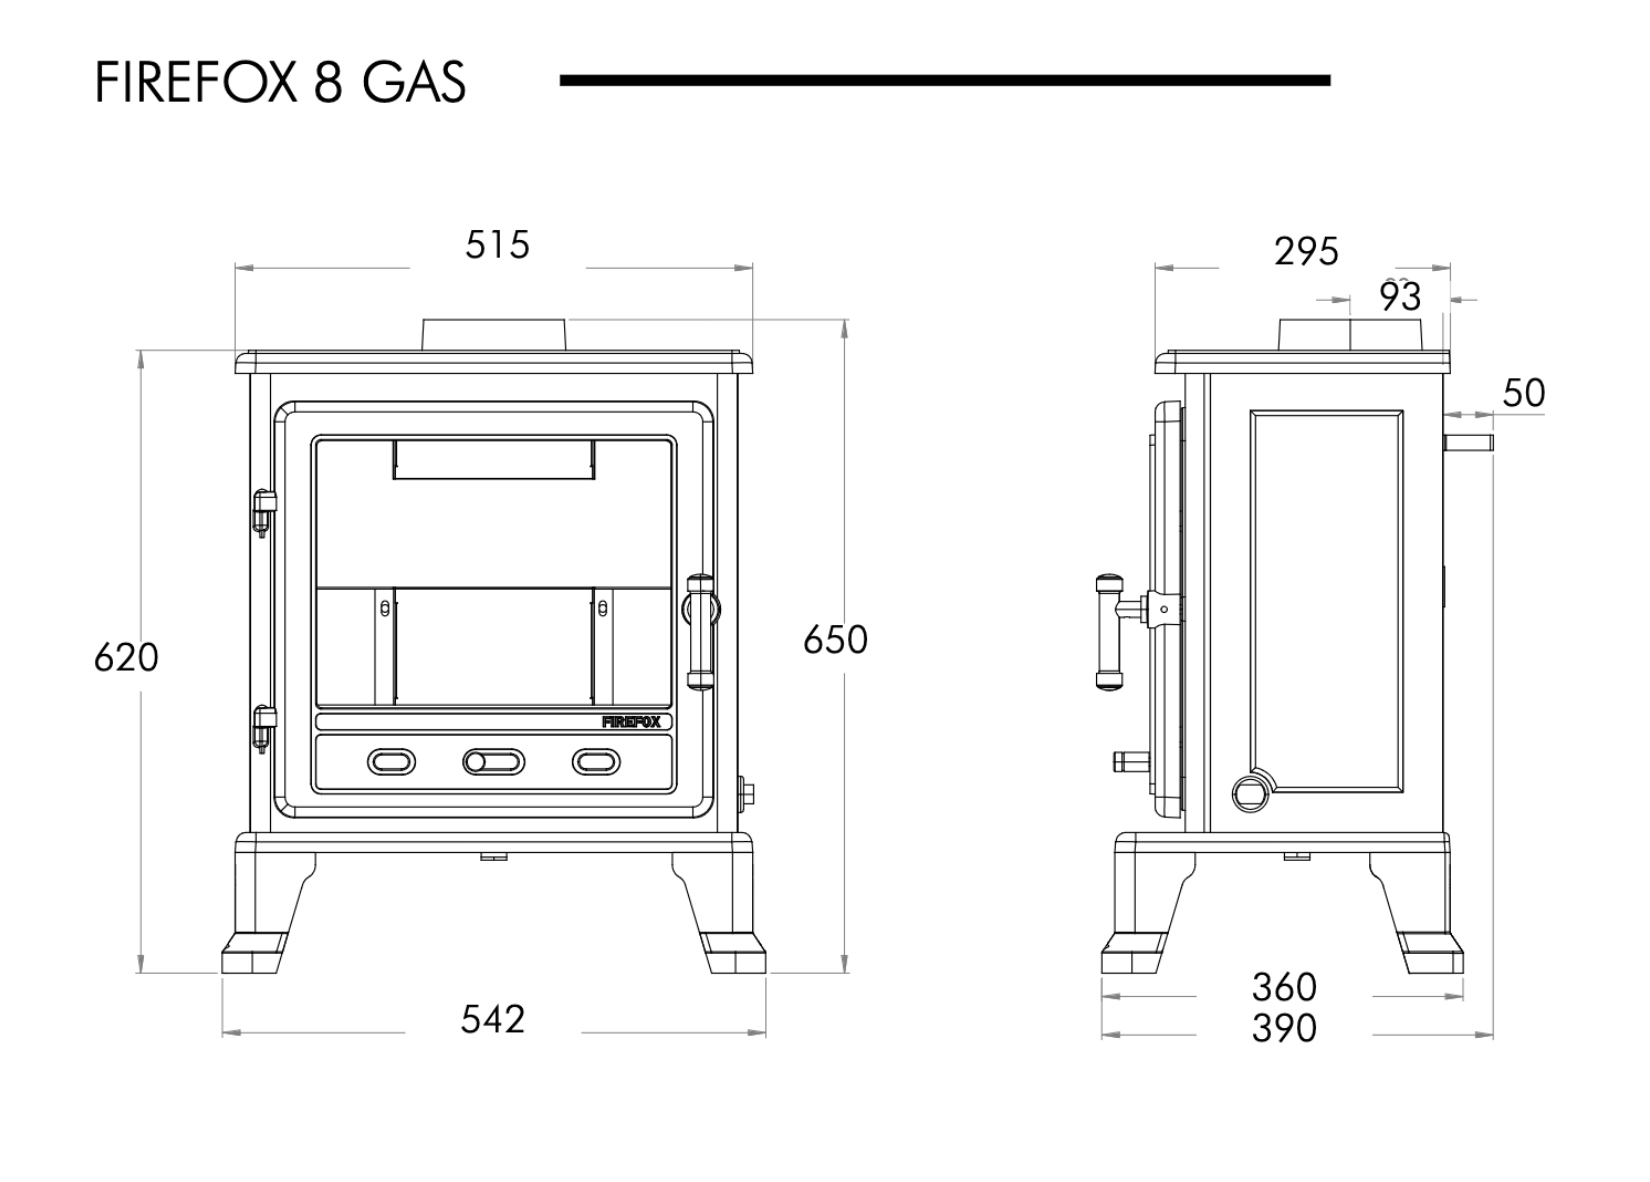 Firefox 8 Eco Gas Stove Dimensions